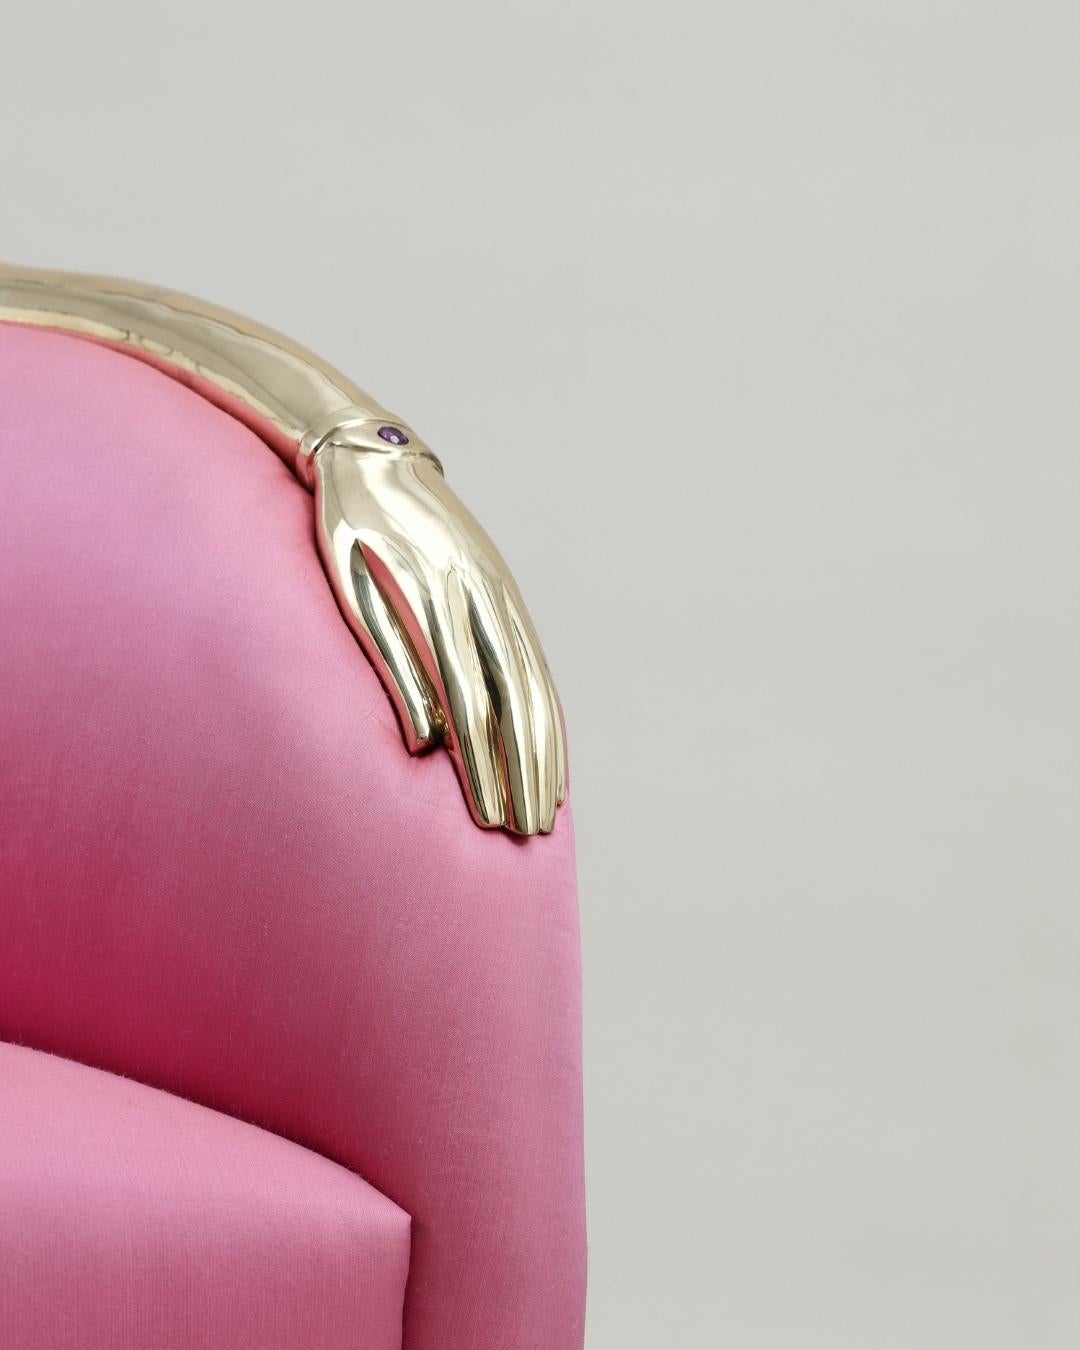 A sofa that encourages confidence, taken from Dalí’s compositions for Jean Michel Frank. A typical surreal interpretation of a piece of furniture extremely bourgeois and conventional. This piece carries the appearance of human elements – a feminine